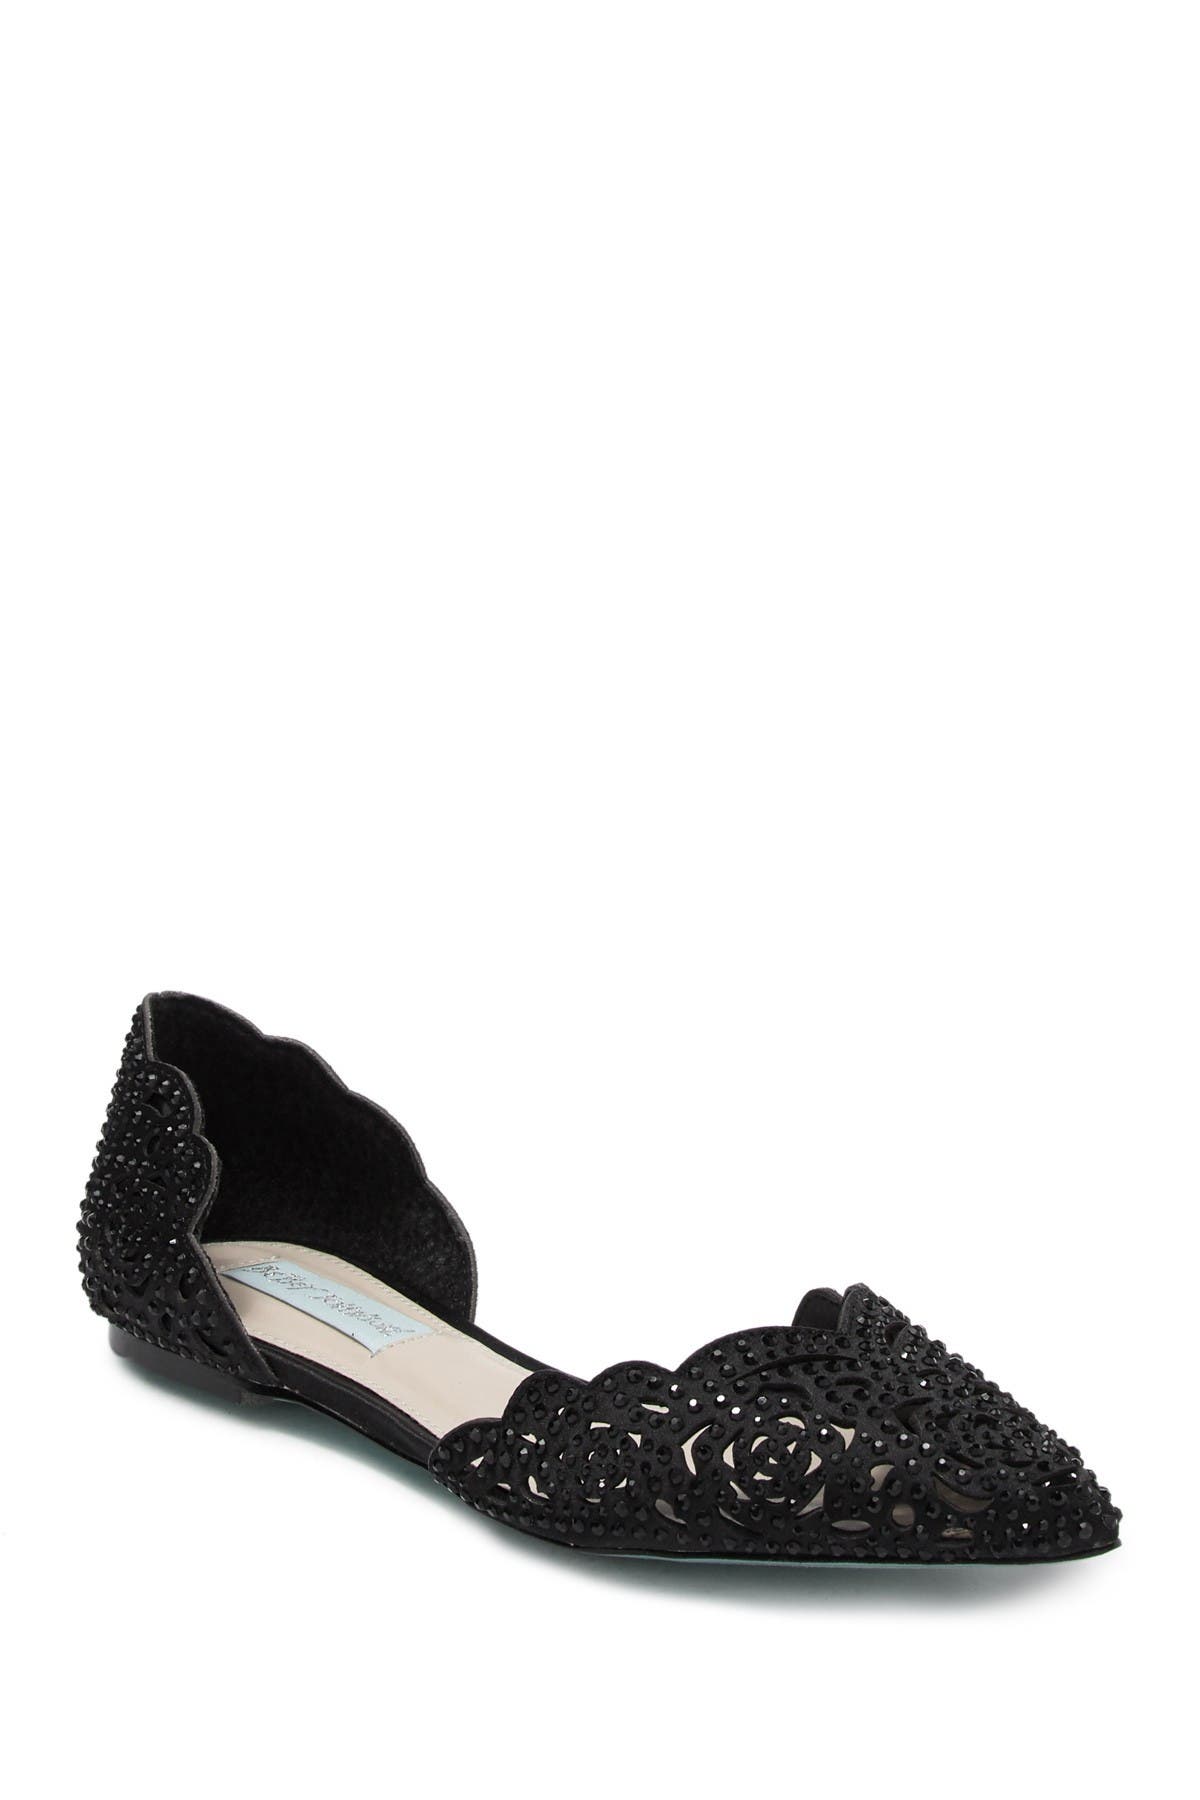 Betsey Johnson | Lucy d'Orsay Flat 